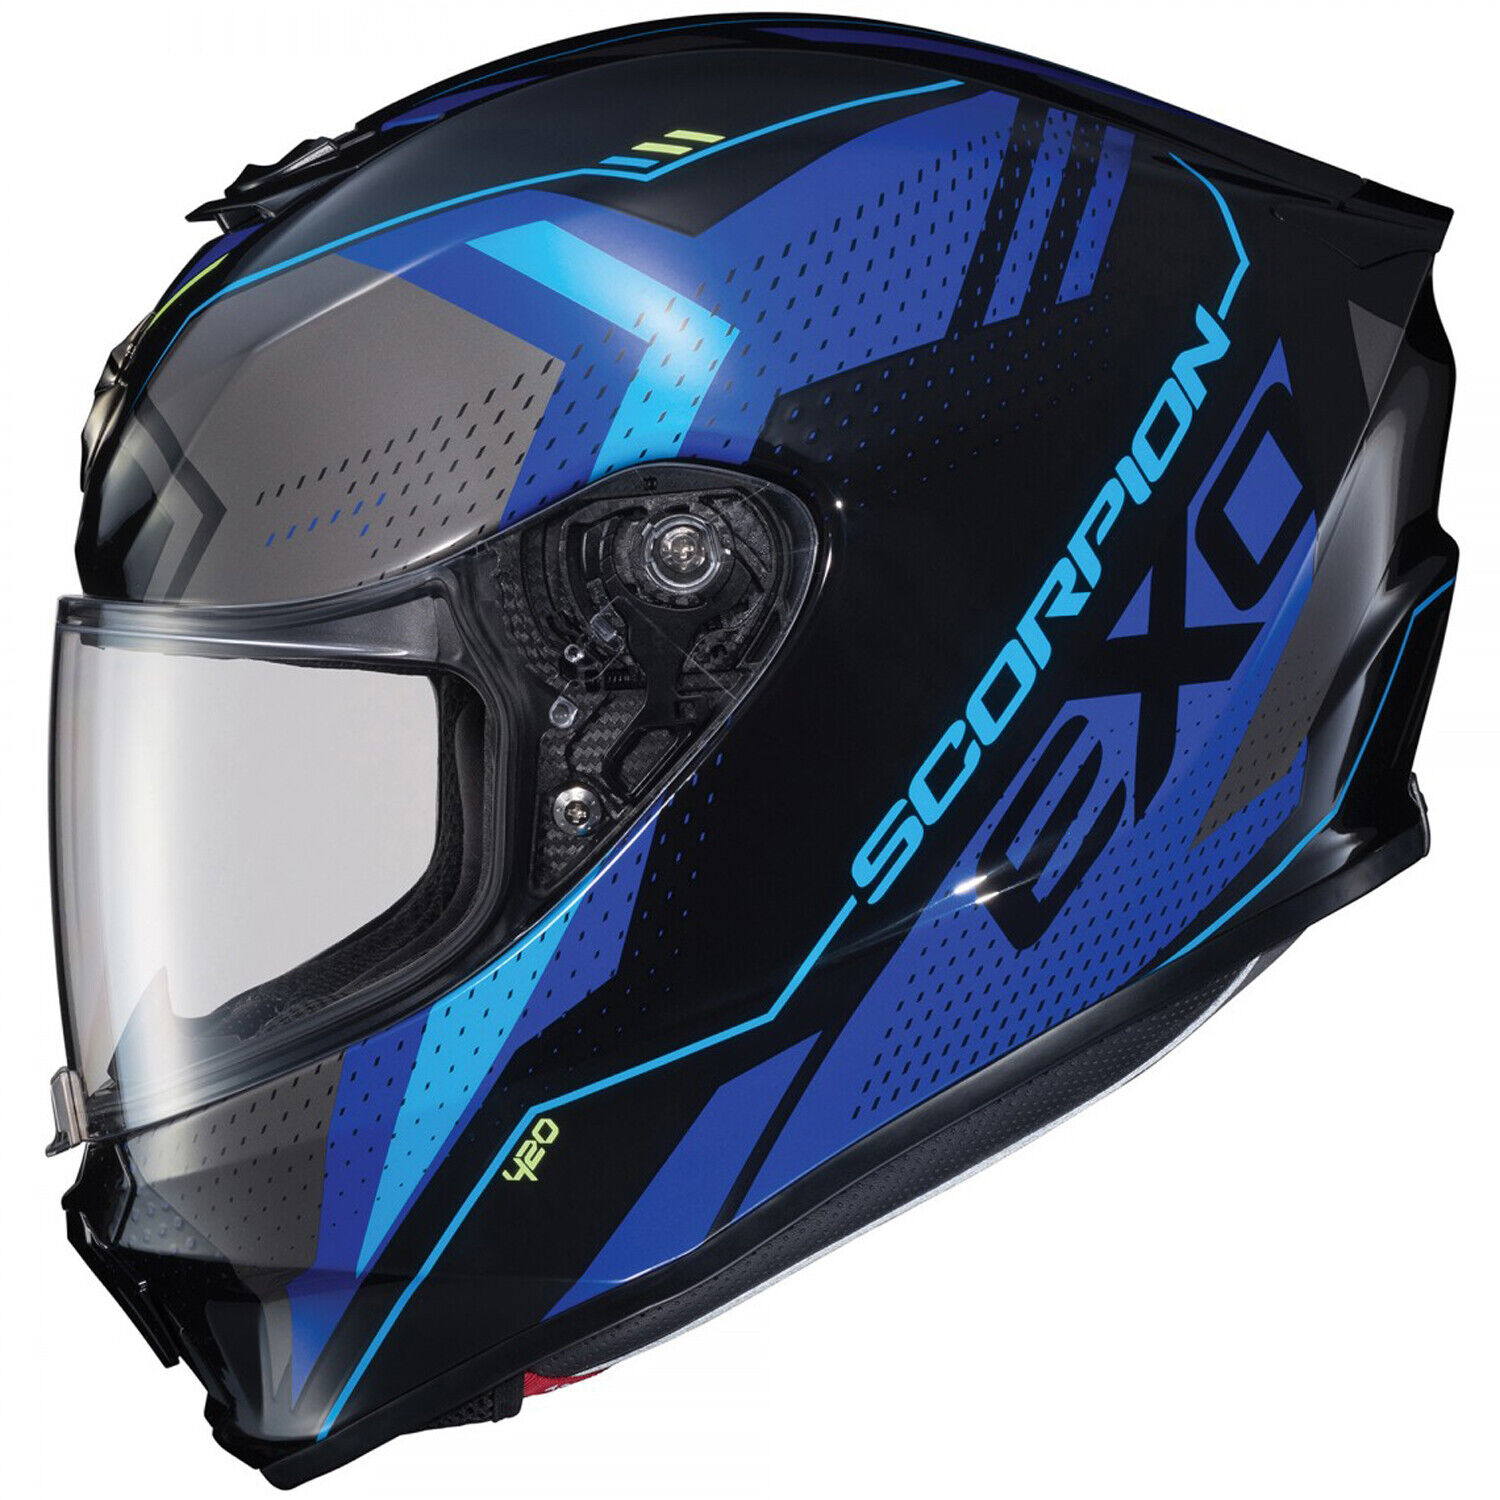 Scorpion EXO-R420 Motorcycle Helmet SNELL - CHOOSE COLOR & SIZE (CLEAR SHIELD)